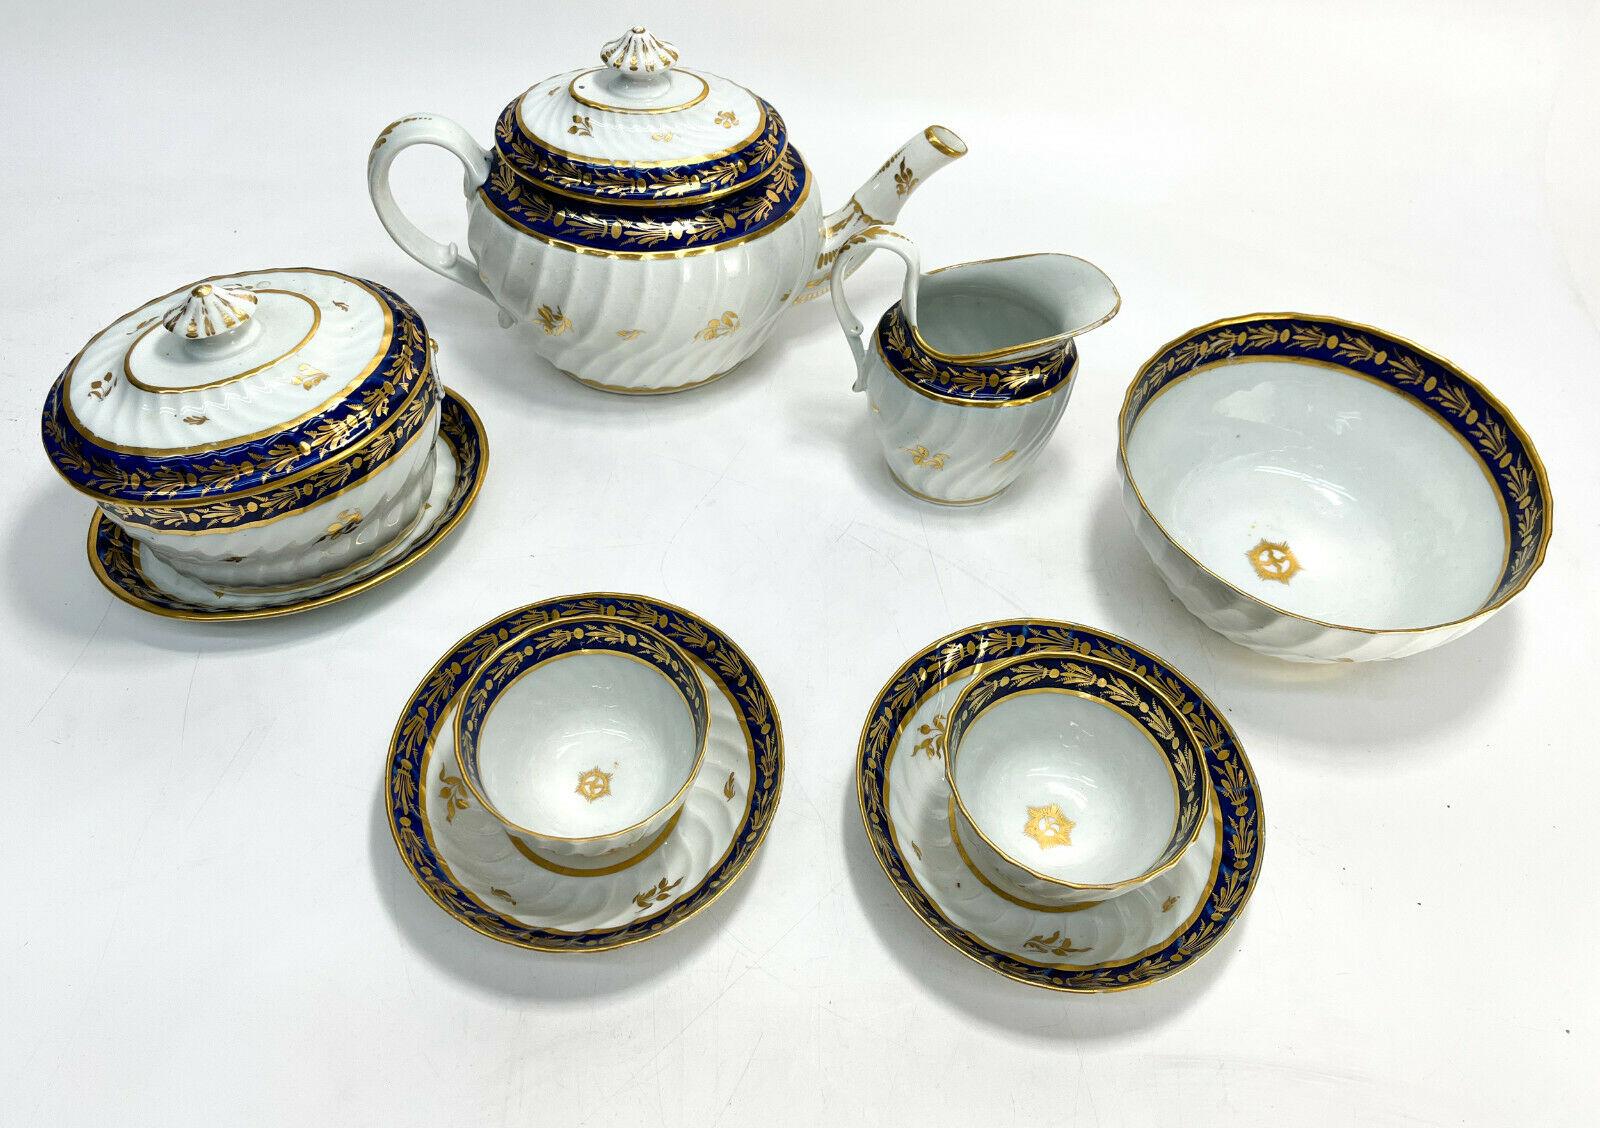 English Porcelain Tete-a-Tete Tea Service, Cobalt Blue & Gilt, Early 19th Cent

Swirled ribbed texture with cobalt blue and gilt leaf designs to the rim. Unmarked.

Additional Information:
Model: Tete-a-Tete Tea 
Material: Porcelain
Type: Tea